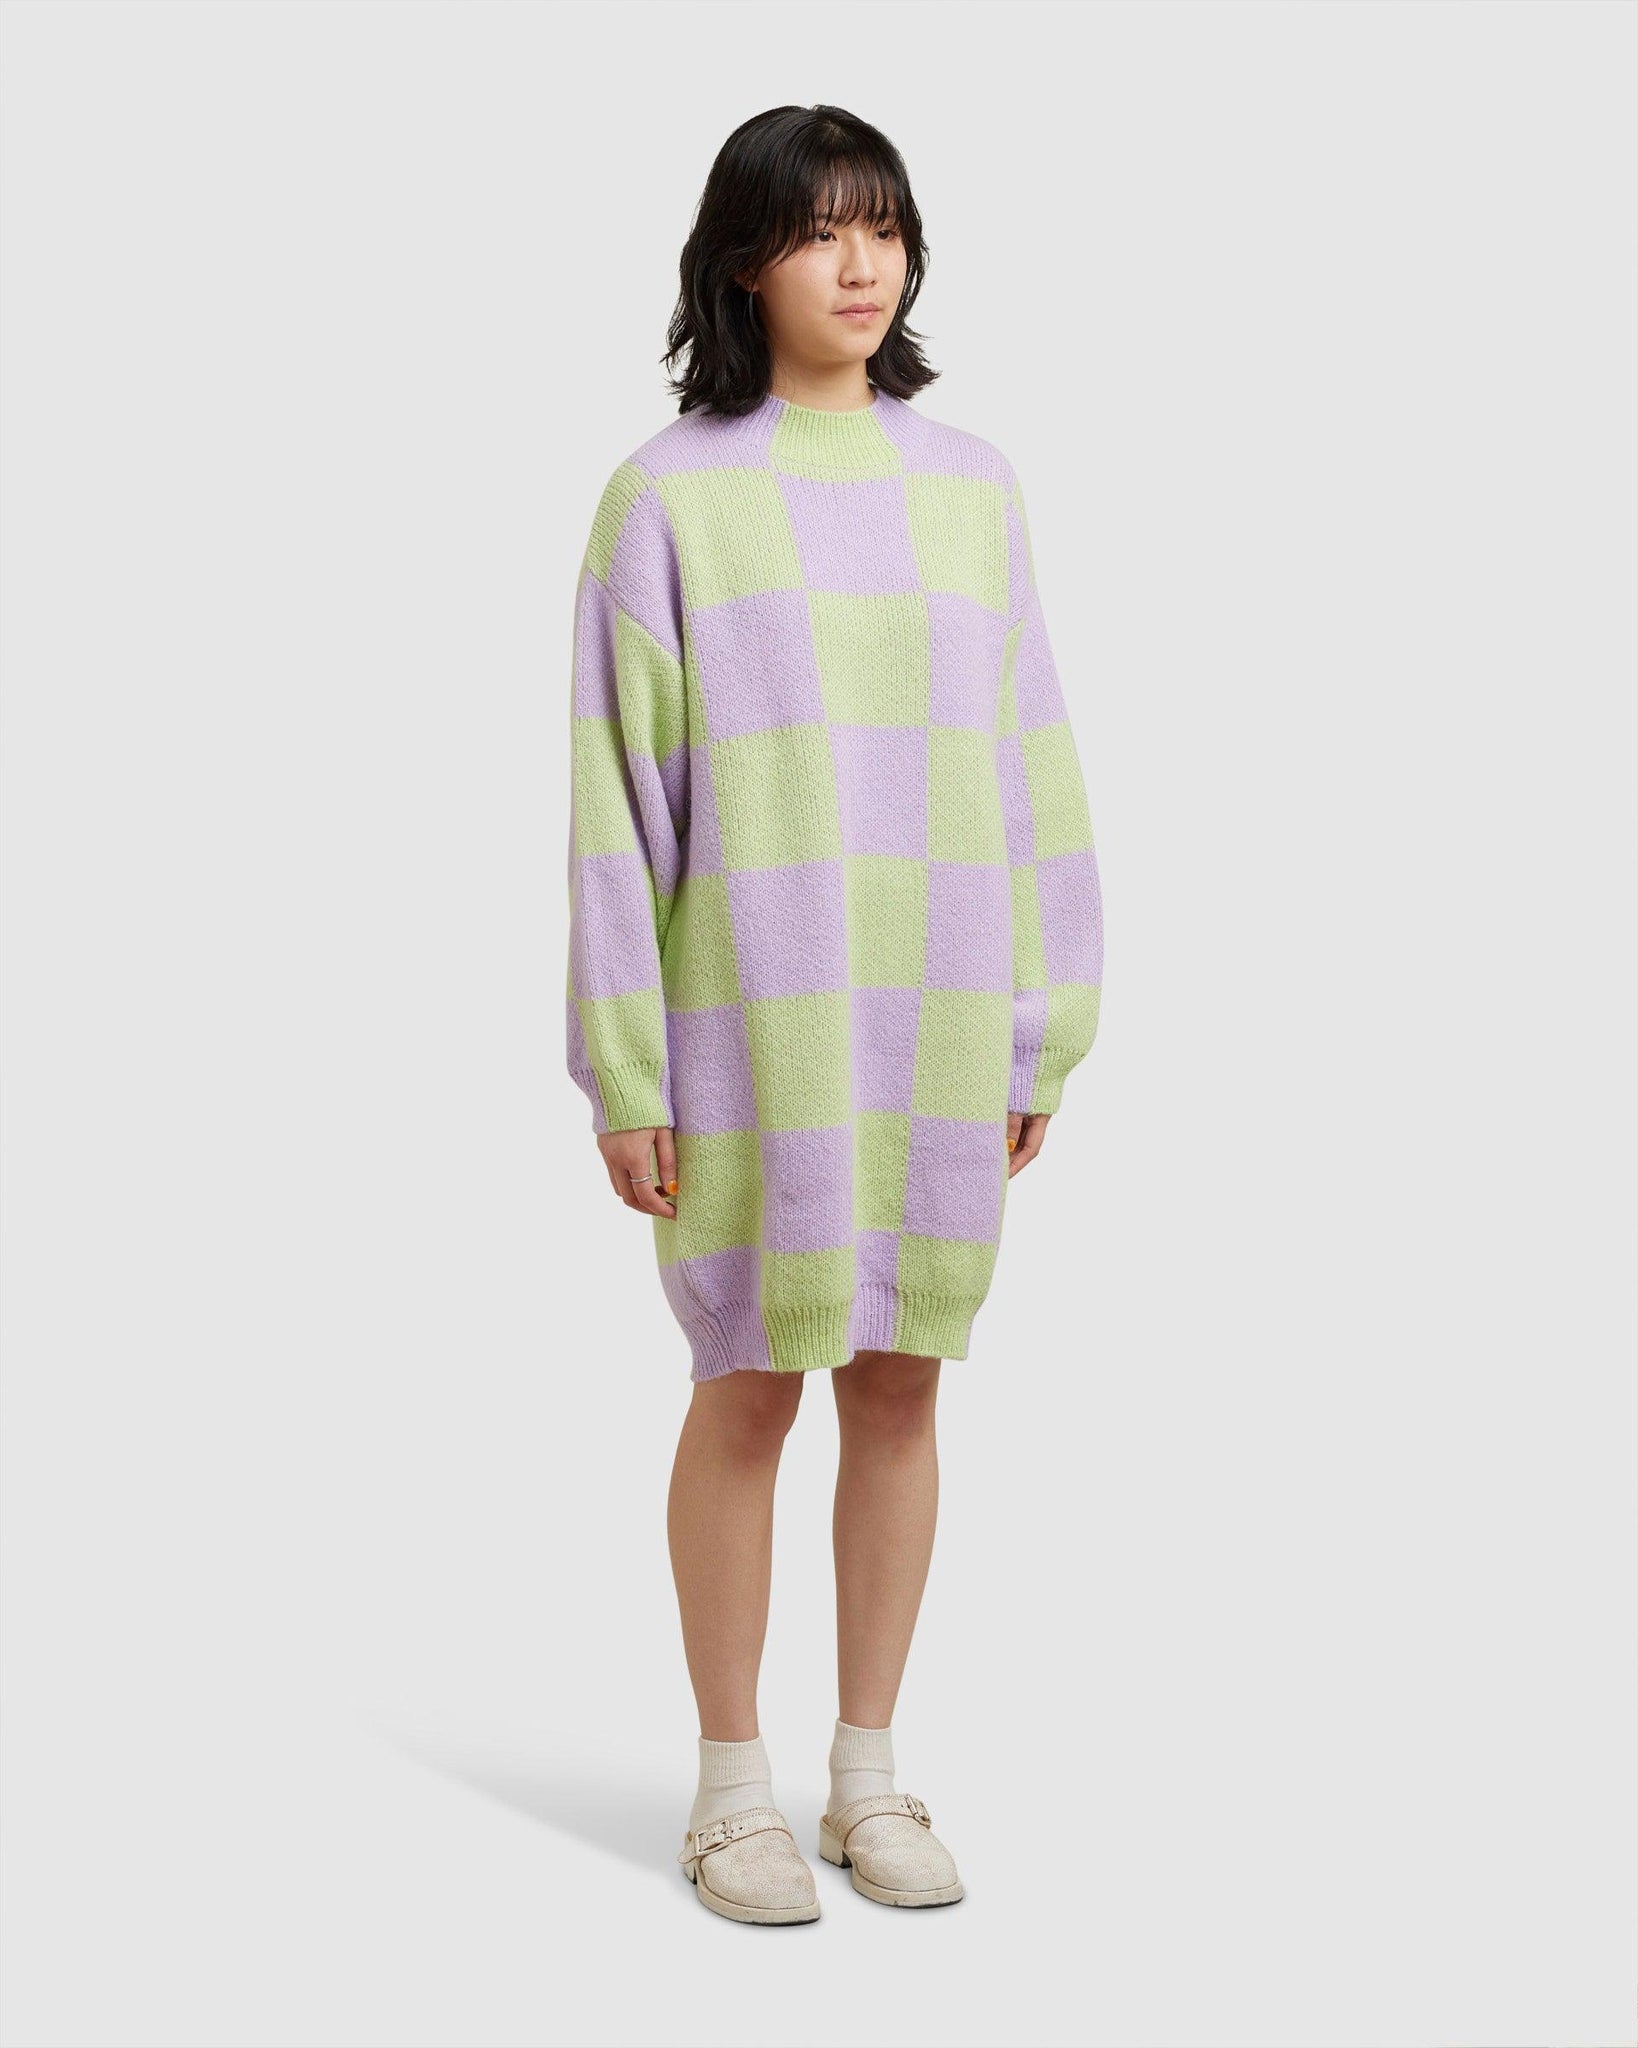 Perla Alpaca Knit Dress - {{ collection.title }} - Chinatown Country Club 